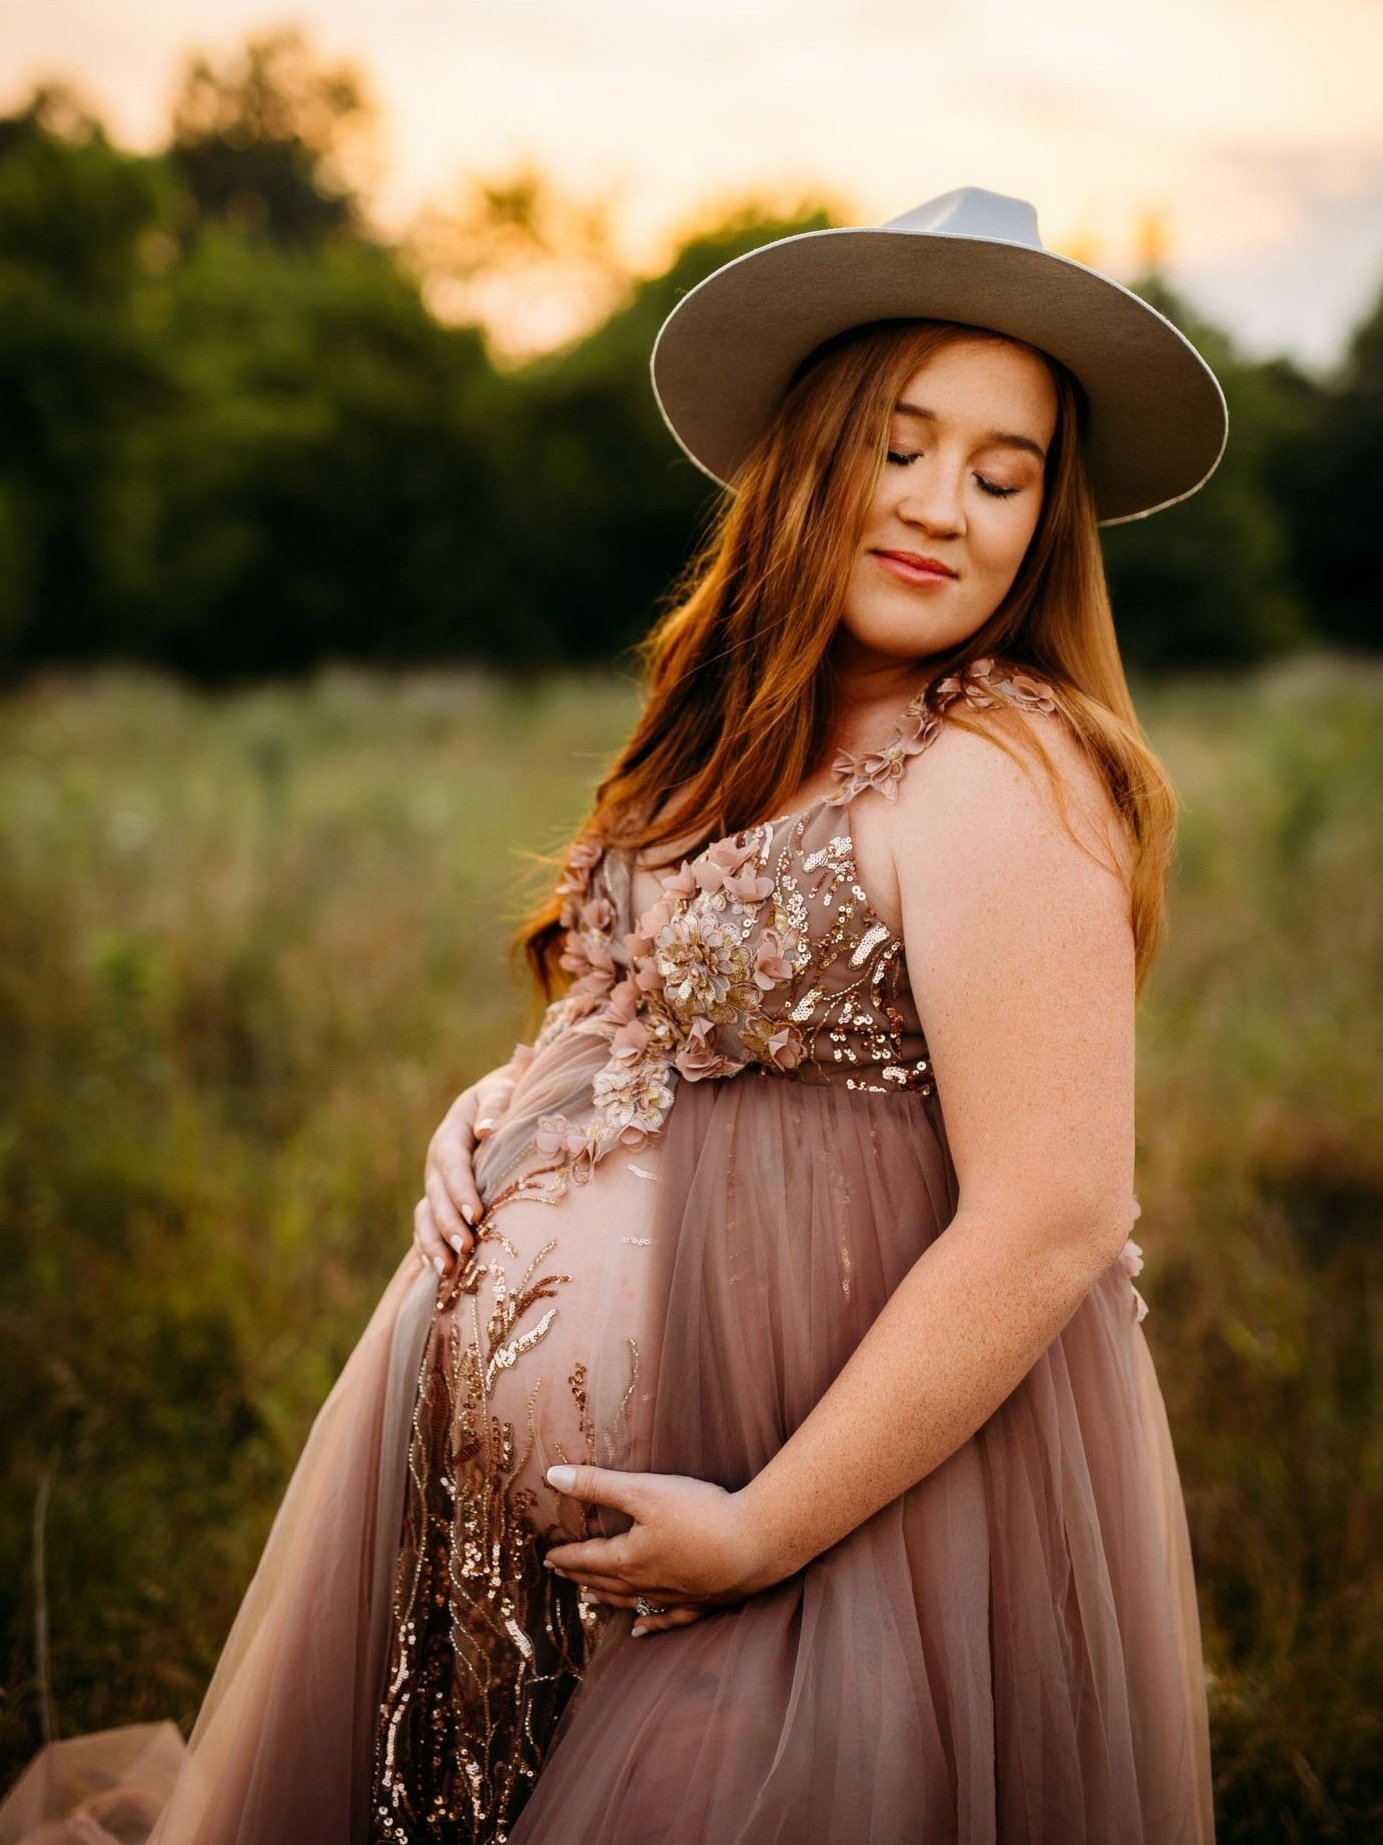 St. Louis Maternity Photographer  Professional Maternity Photography